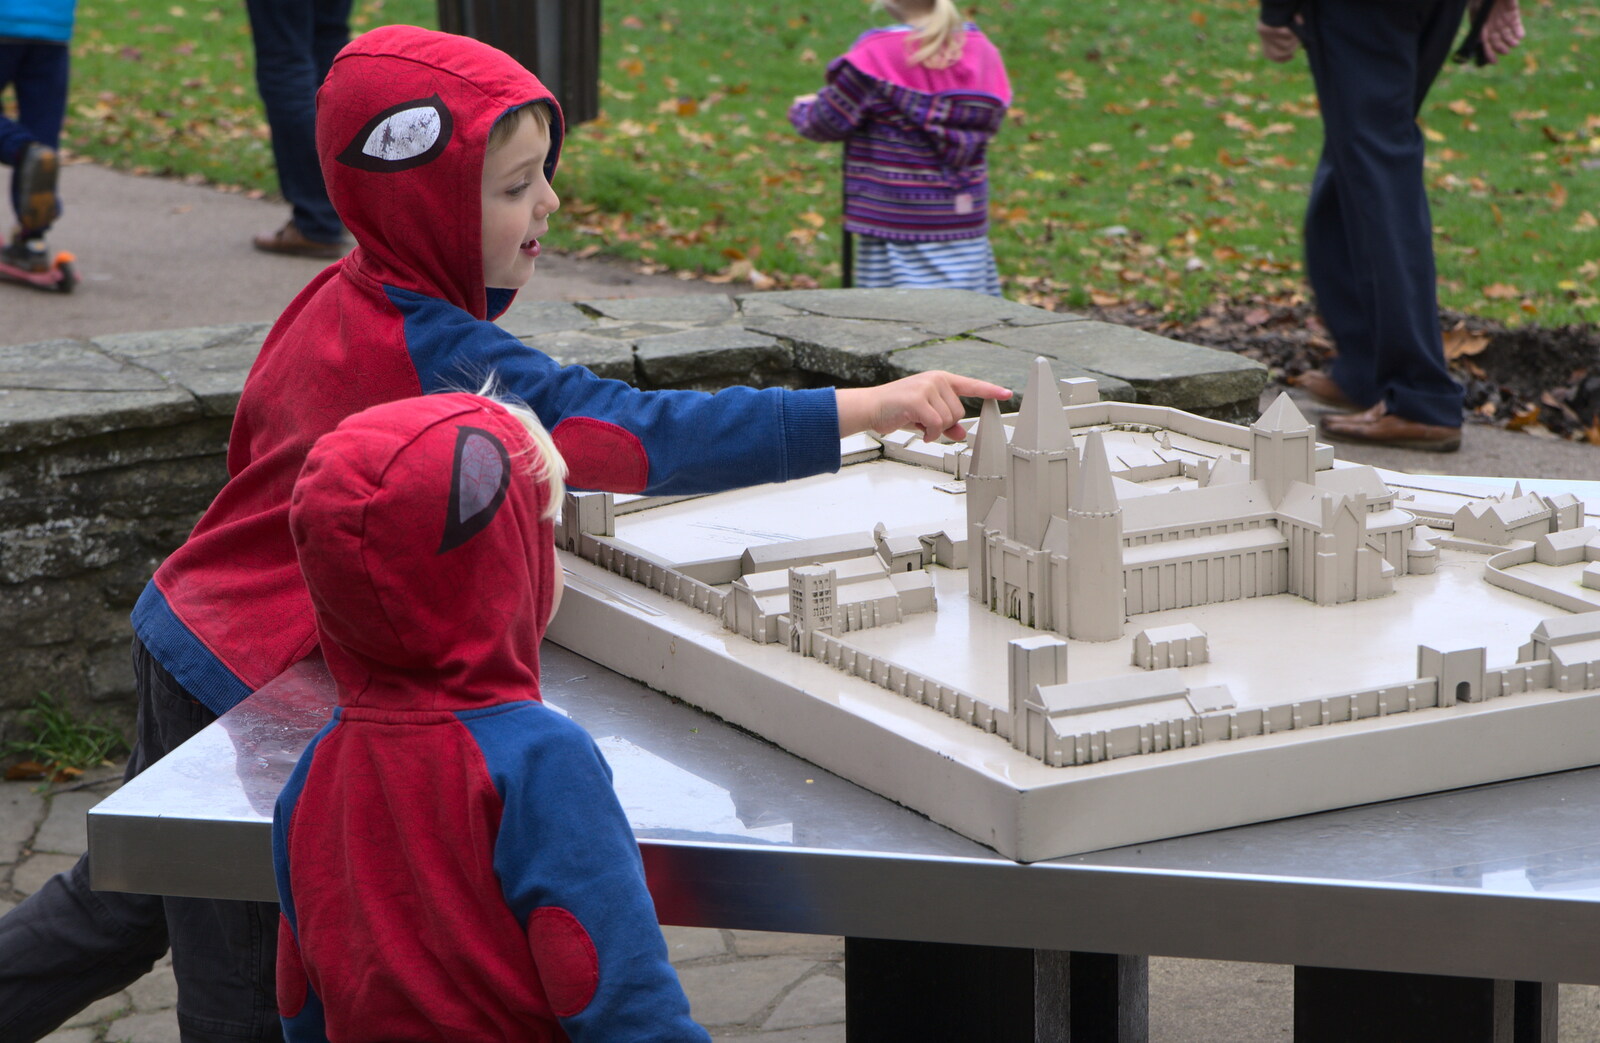 The boys look a model of the original abbey site from A Trip to Abbey Gardens, Bury St. Edmunds, Suffolk - 29th October 2014